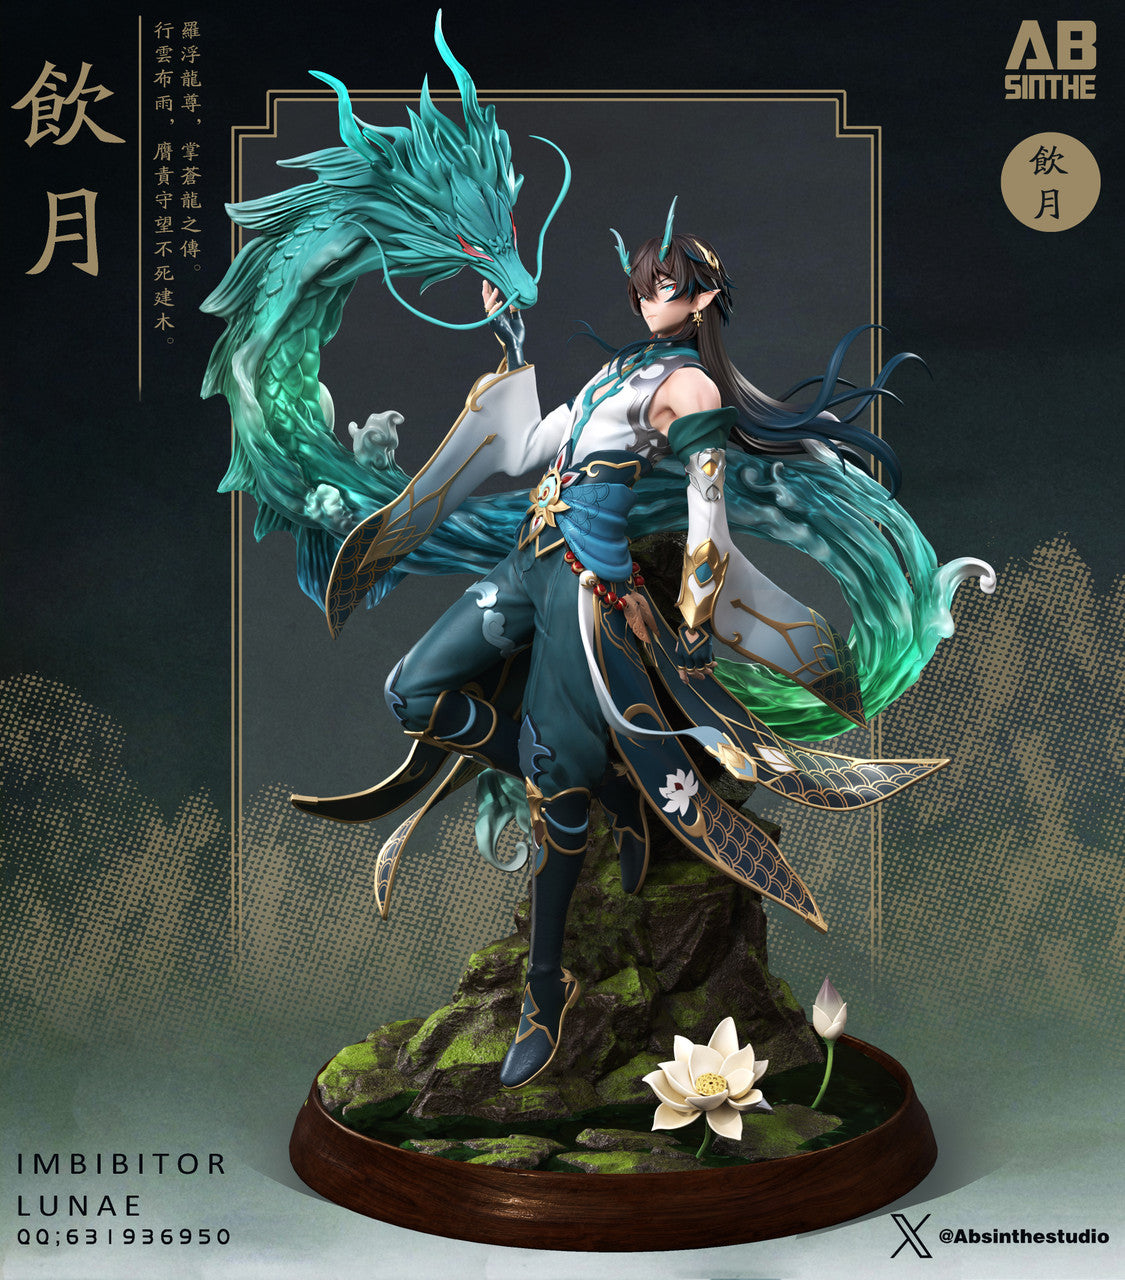 [PRE ORDER] Honkai Star Rail - Absinthe Studio - Dan Heng(Price does not include shipping)